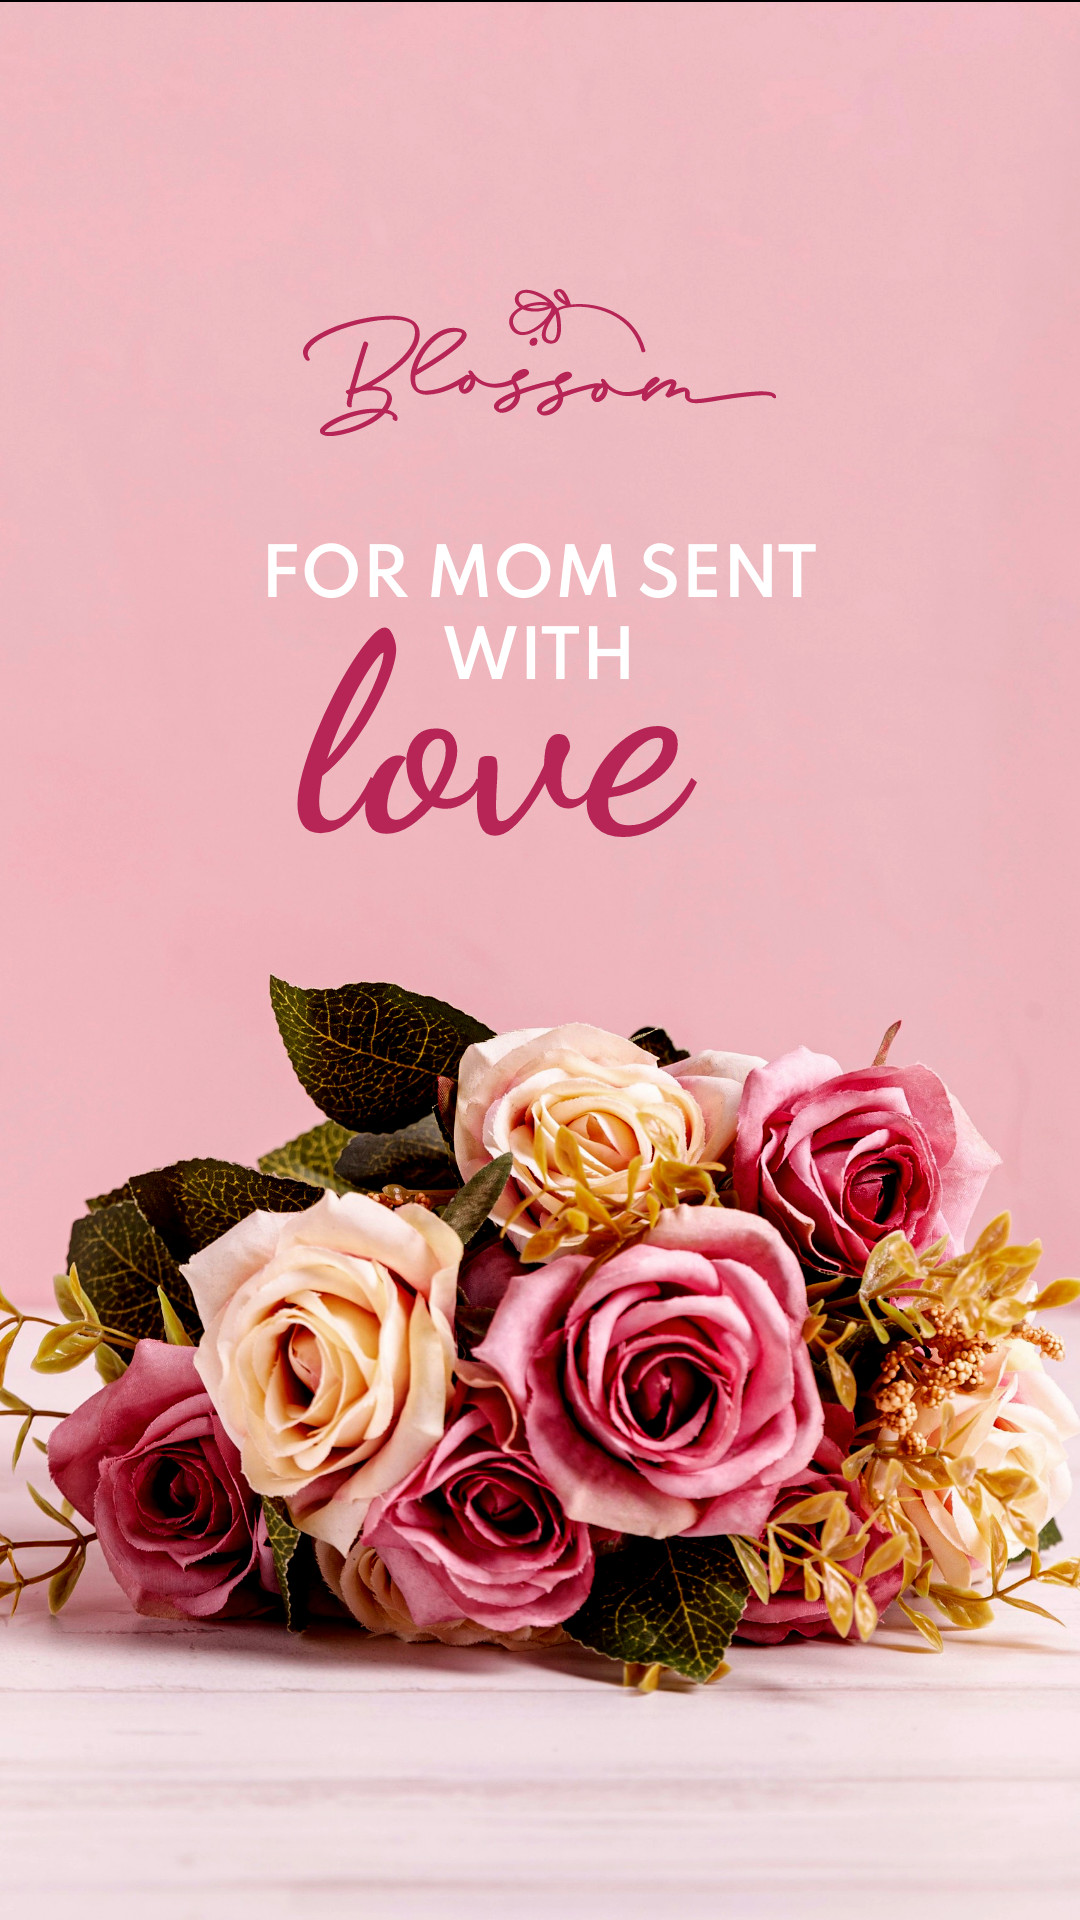 Sent with Love Mother's Day Flowers